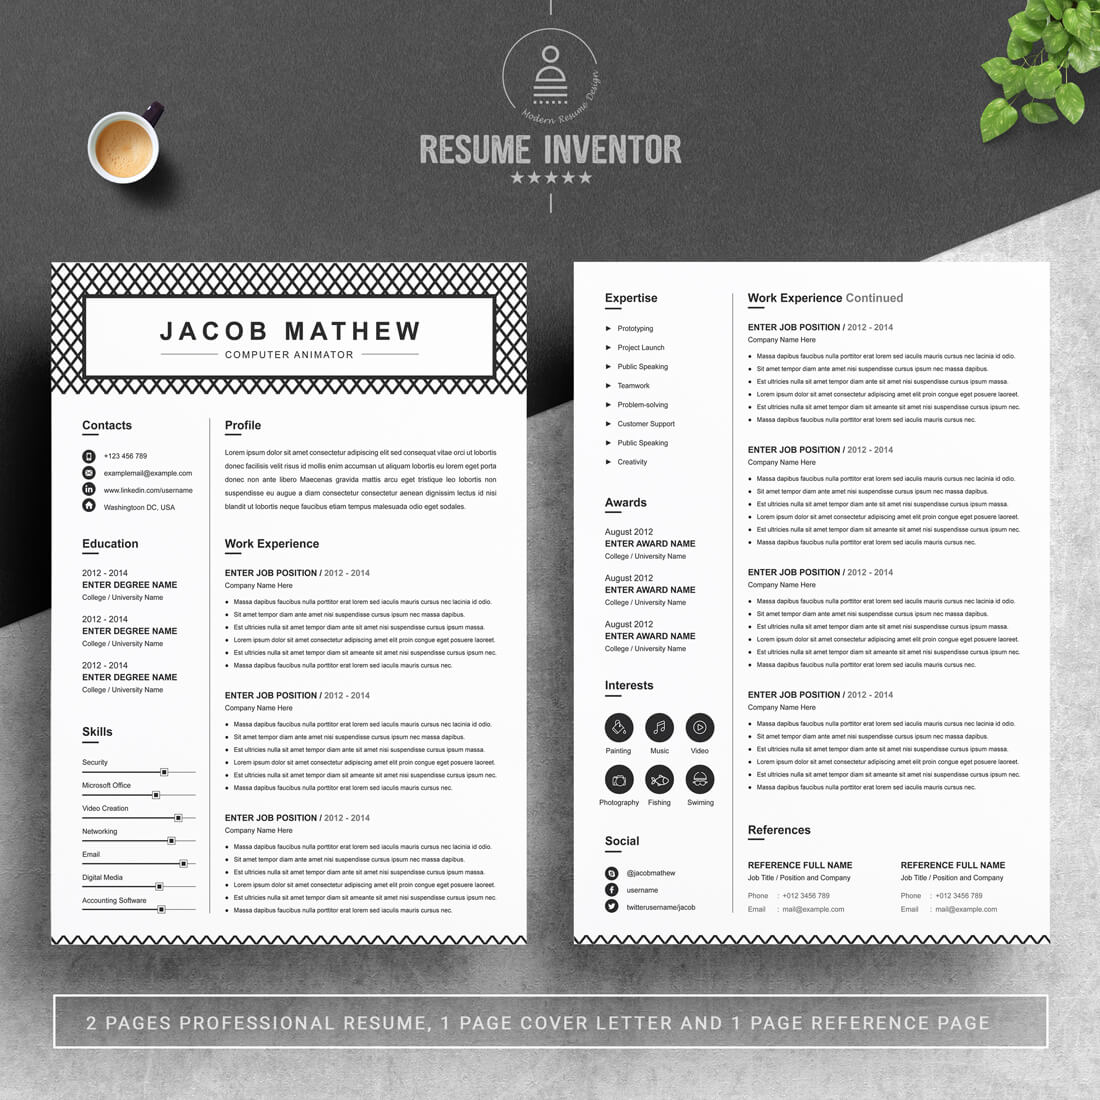 Professional resume template with a black and white checkered pattern.